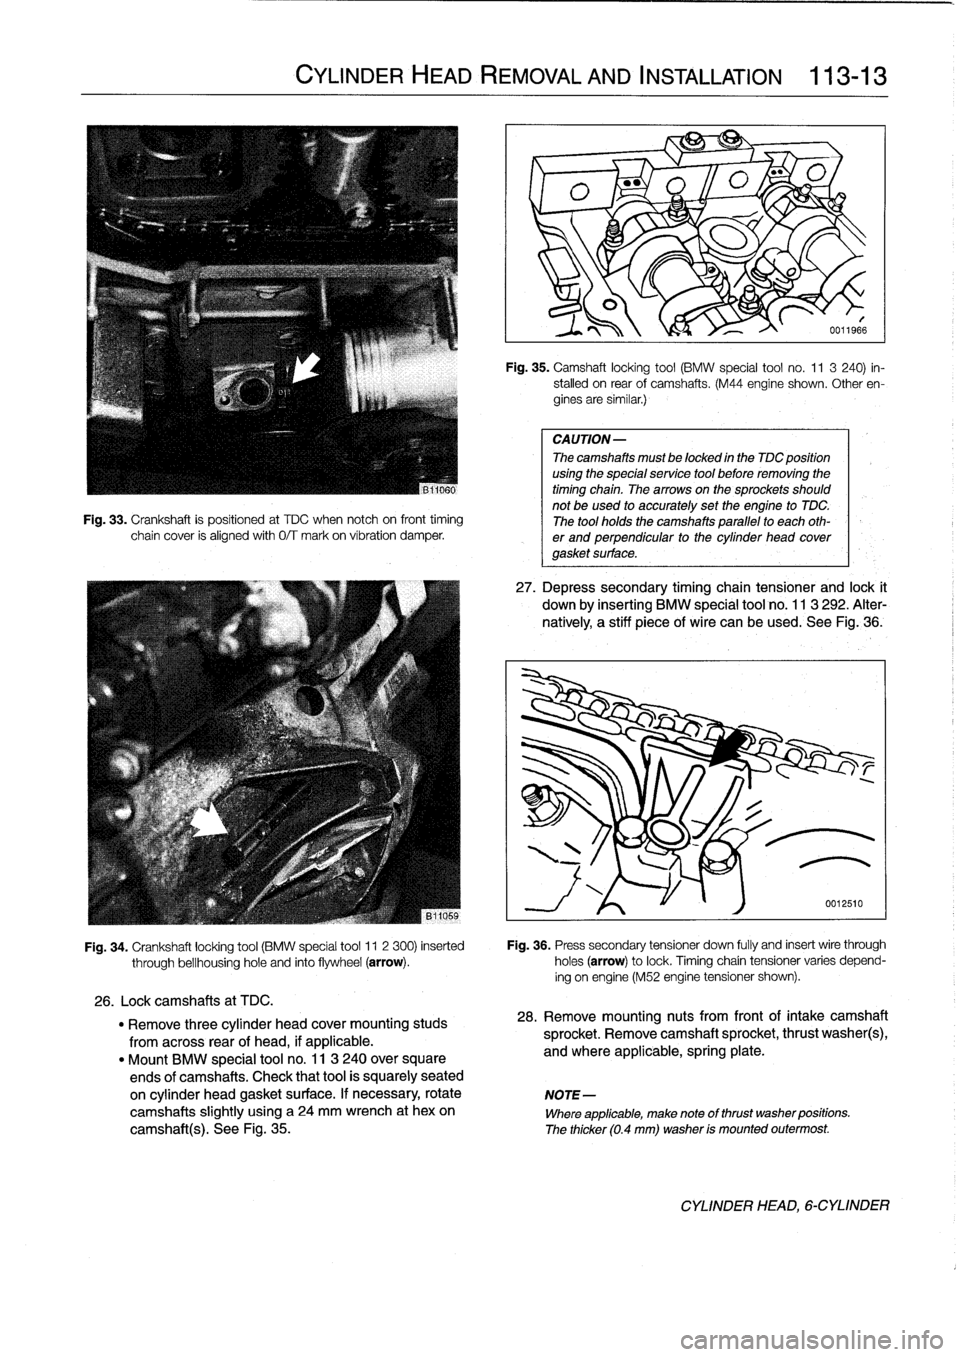 BMW 323i 1993 E36 Manual PDF 
Fig
.
33
.
Crankshaft
is
positioned
at
TDC
when
notch
oh
front
timing
chain
cover
is
alignedwith
0/T
mark
on
víbration
damper
.

CYLINDER
HEAD
REMOVAL
AND
INSTALLATION

	

113-
1
3

Fig
.
35
.
Camsh